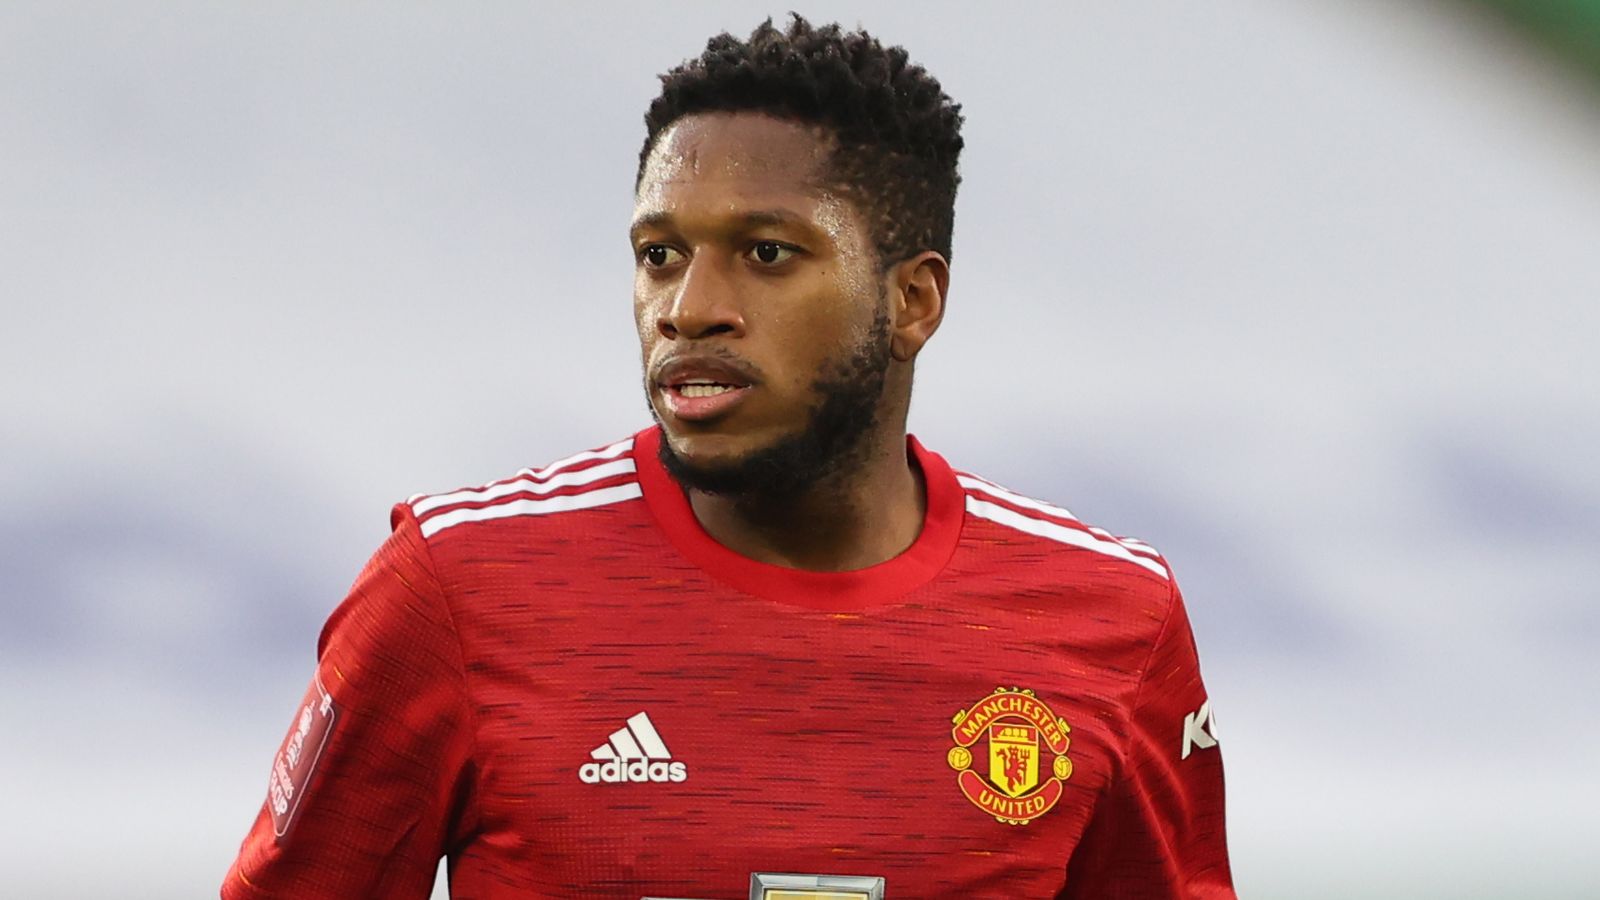 Manchester United midfielder Fred responds to racist abuse he received on social media after Leicester defeat